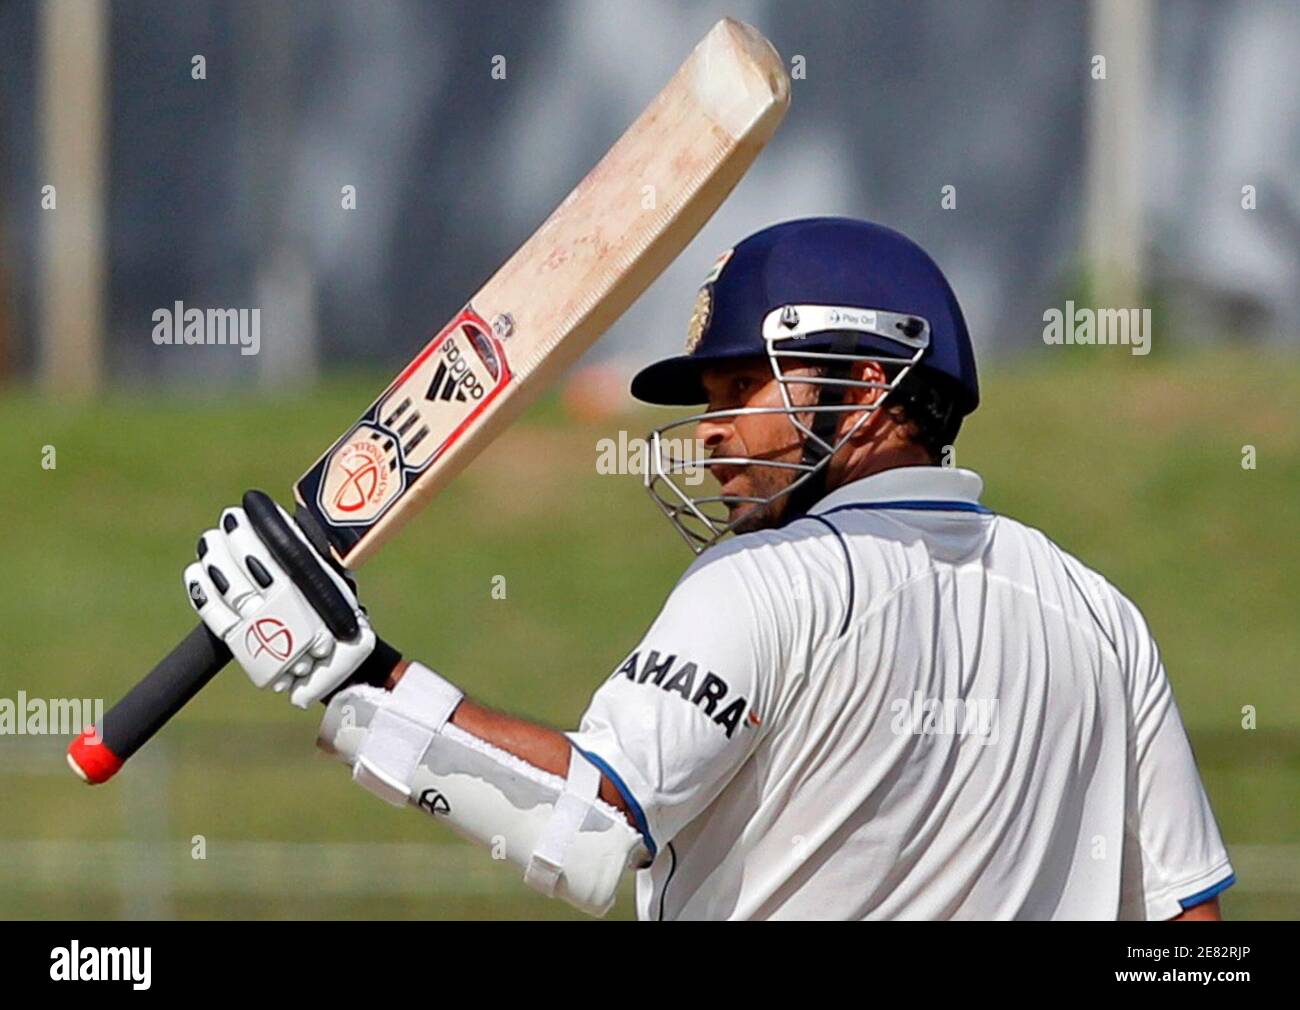 India's Sachin Tendulkar raises his bat to celebrate scoring his half  century against Sri Lanka during the third day of their second test cricket  match in Colombo July 28, 2010. REUTERS/Andrew Caballero-Reynolds (